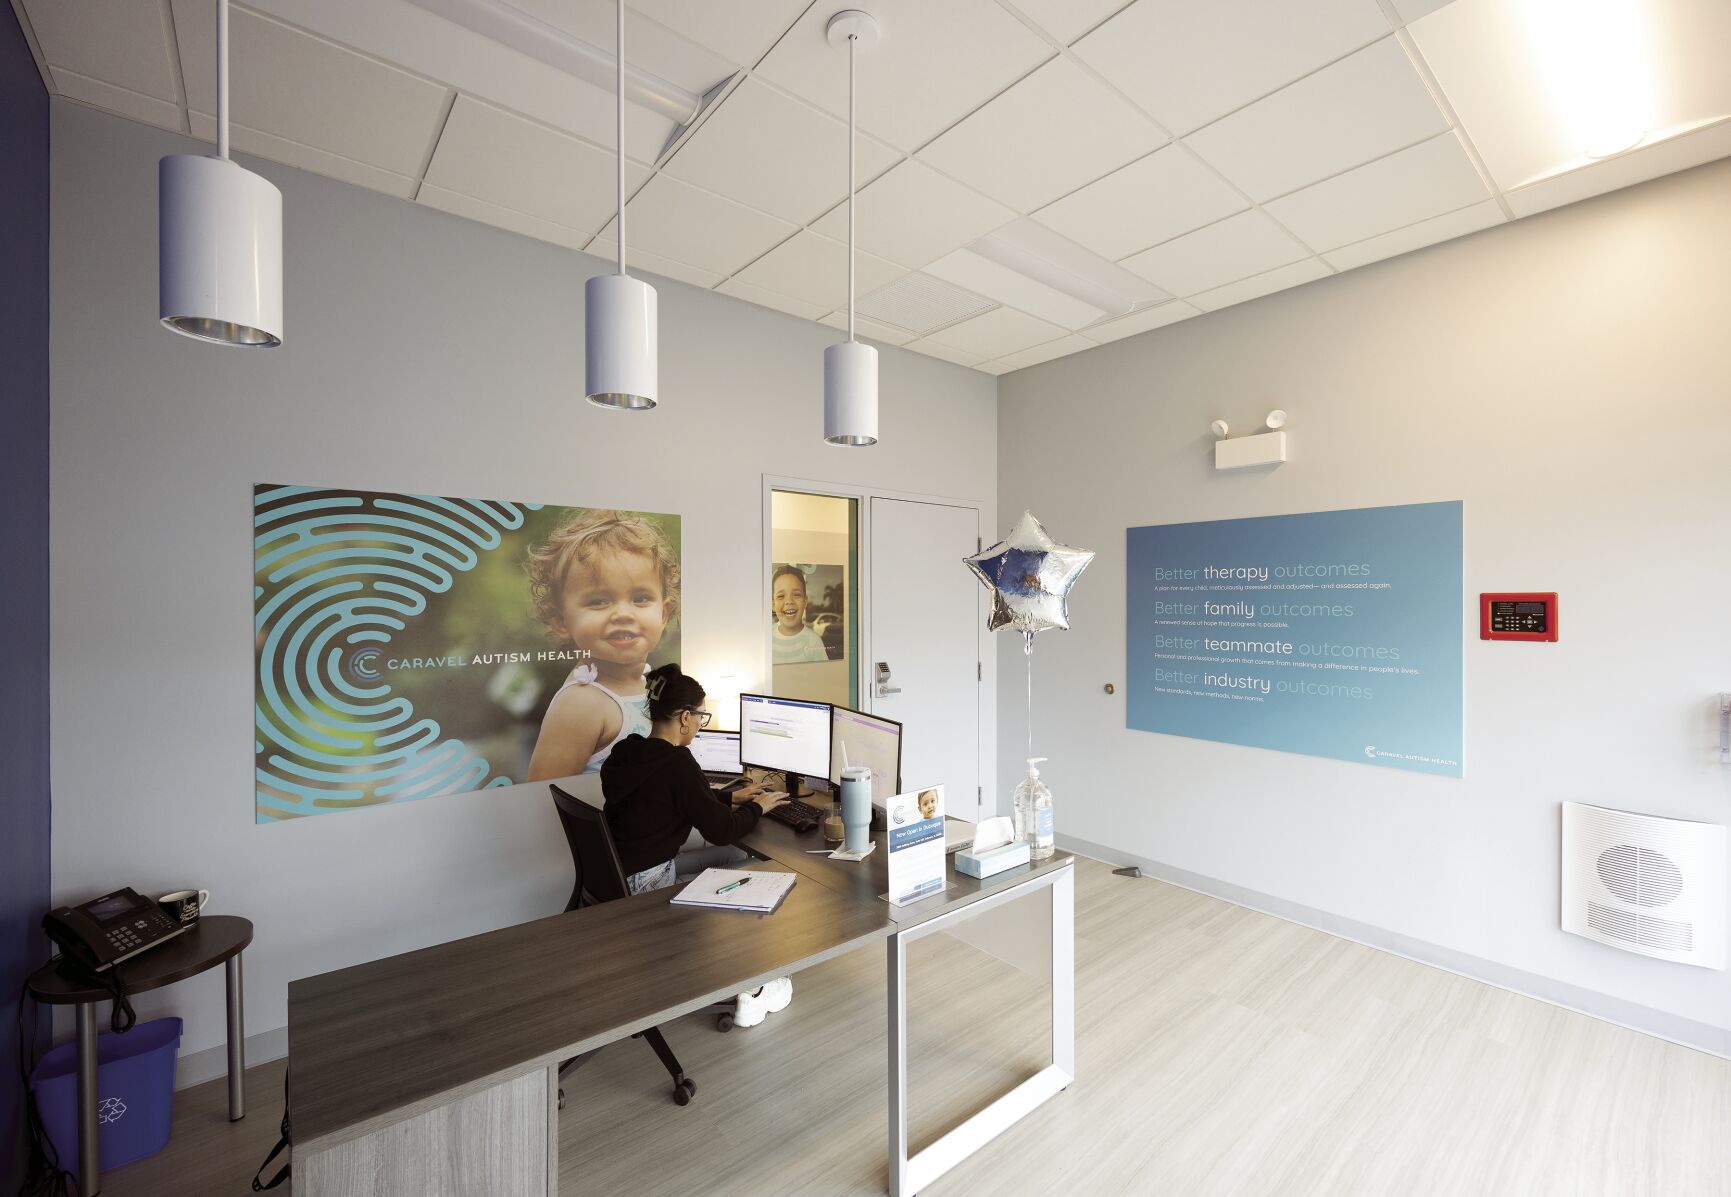 The reception area at Caravel Autism Health in Dubuque.    PHOTO CREDIT: Stephen Gassman